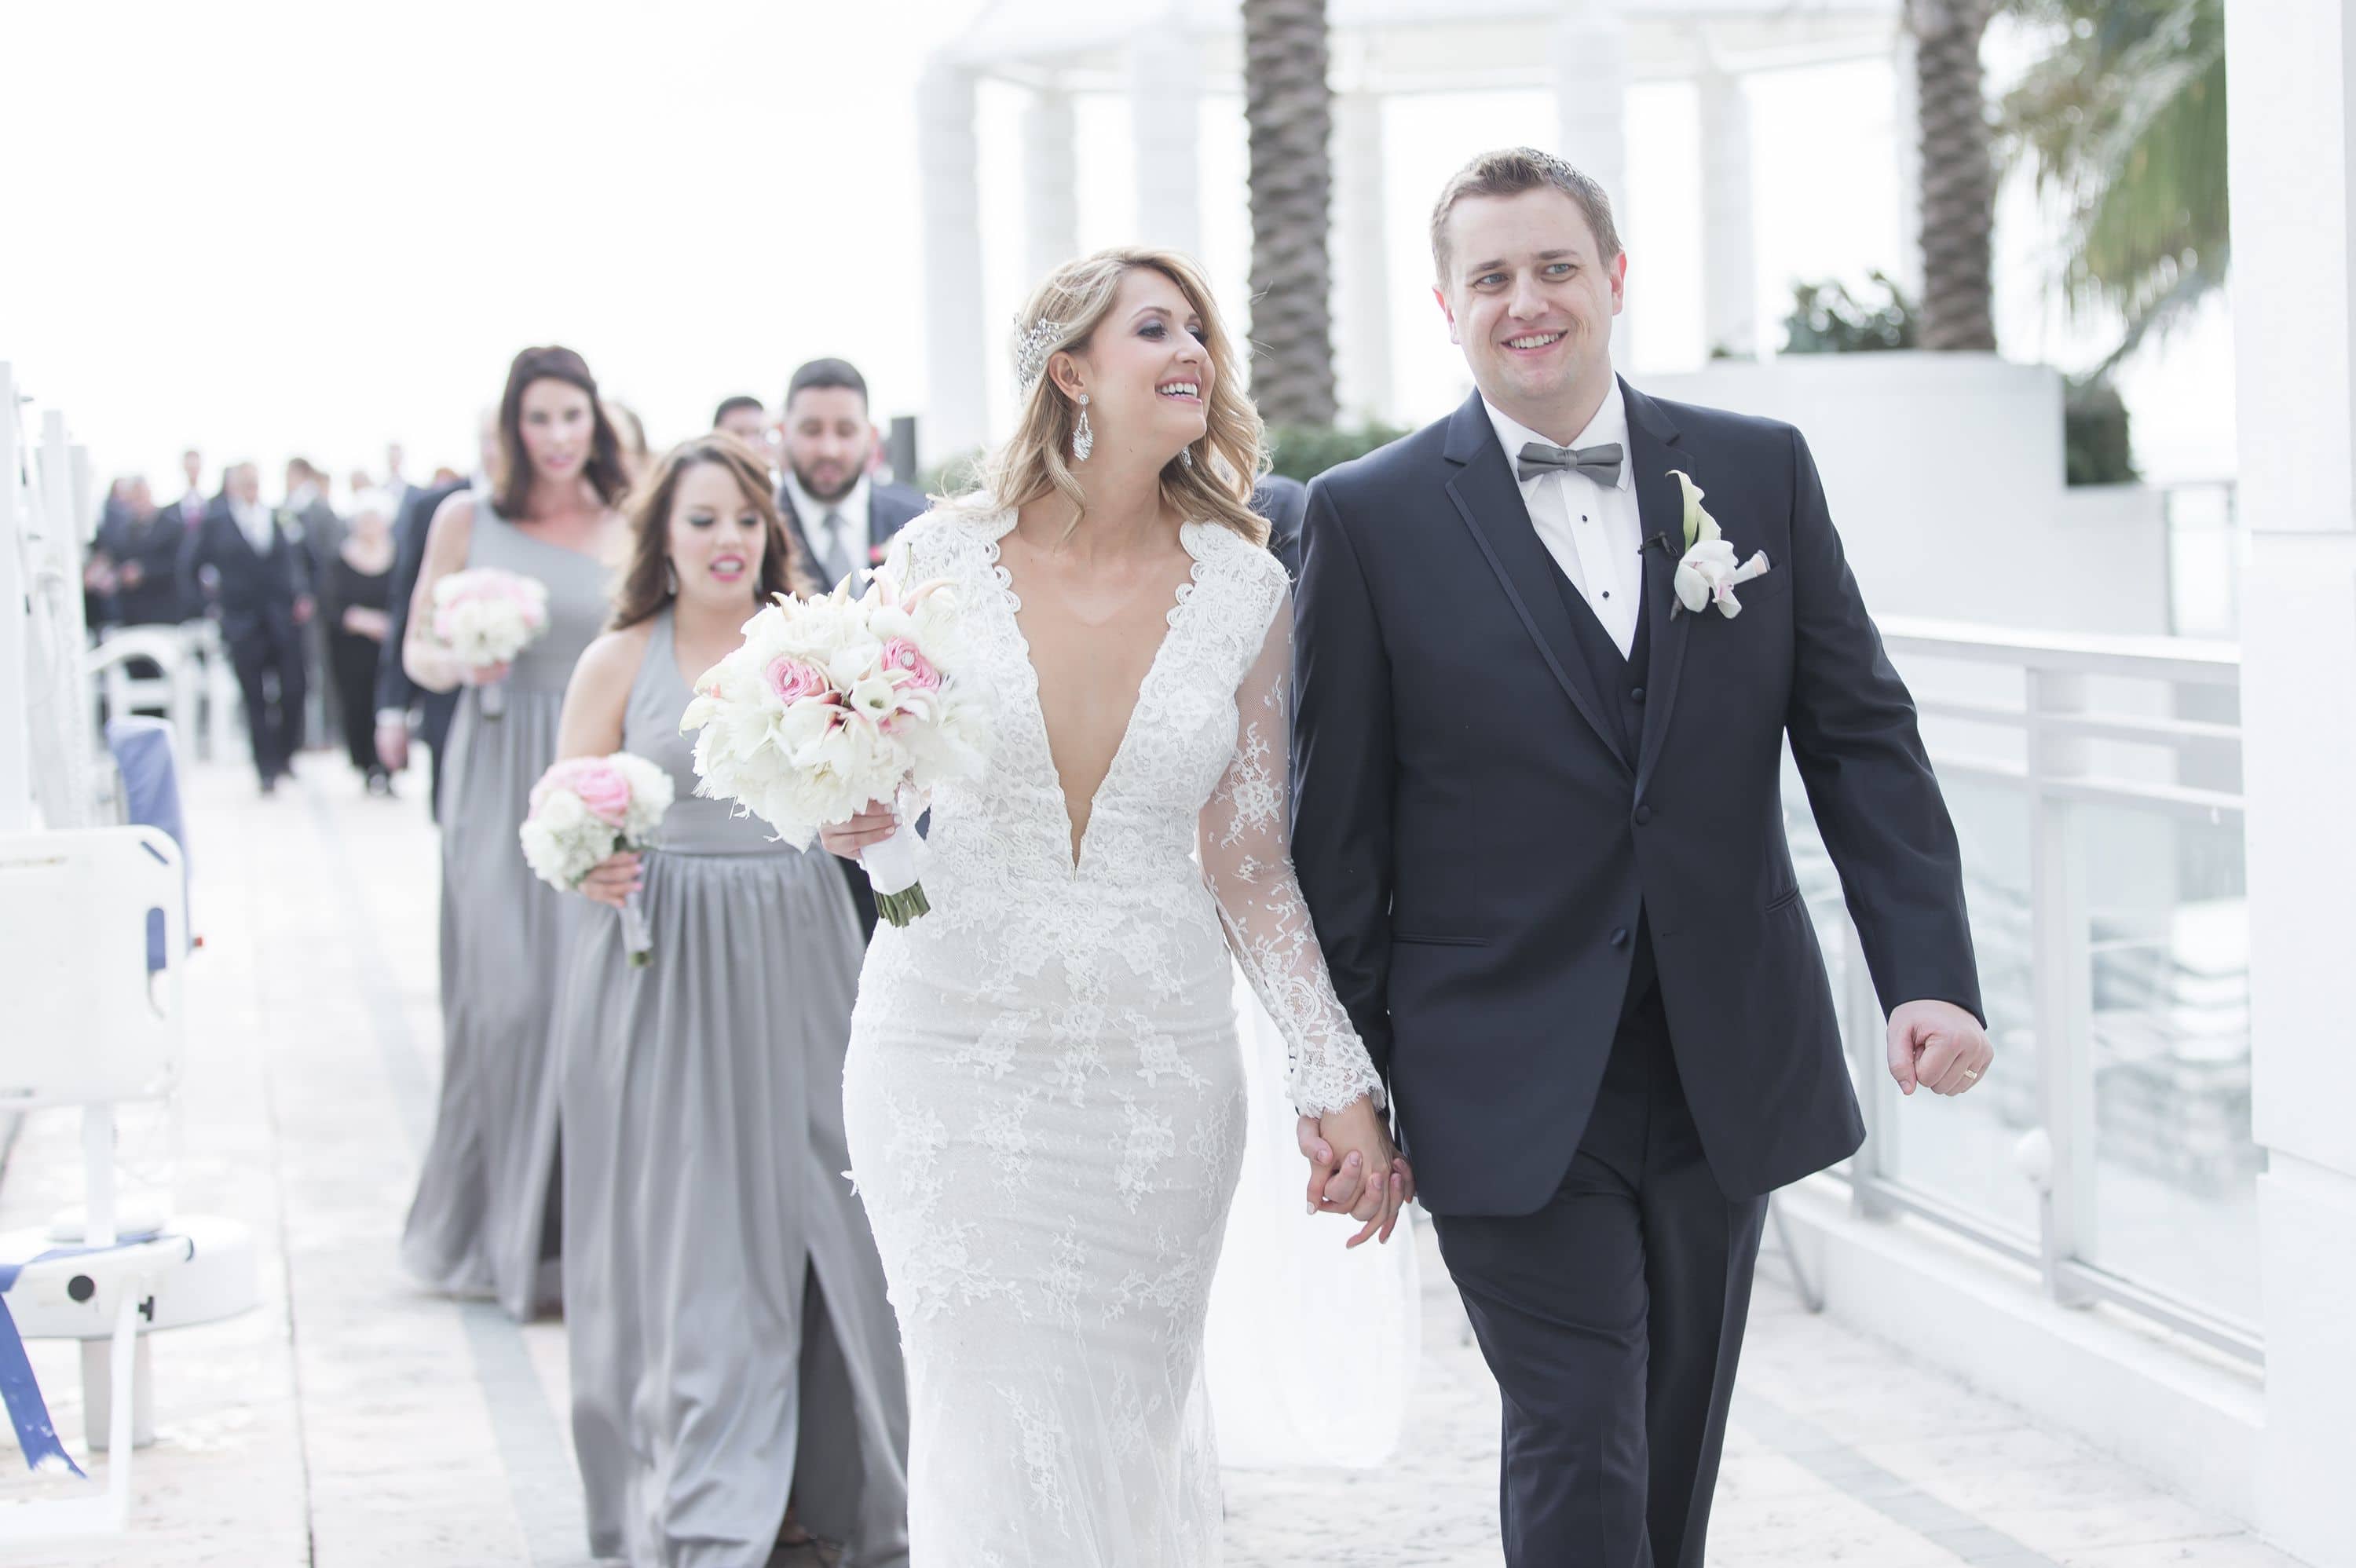 Candid shot of bride and groom after ceremony at this Diplomat Beach Resort Wedding